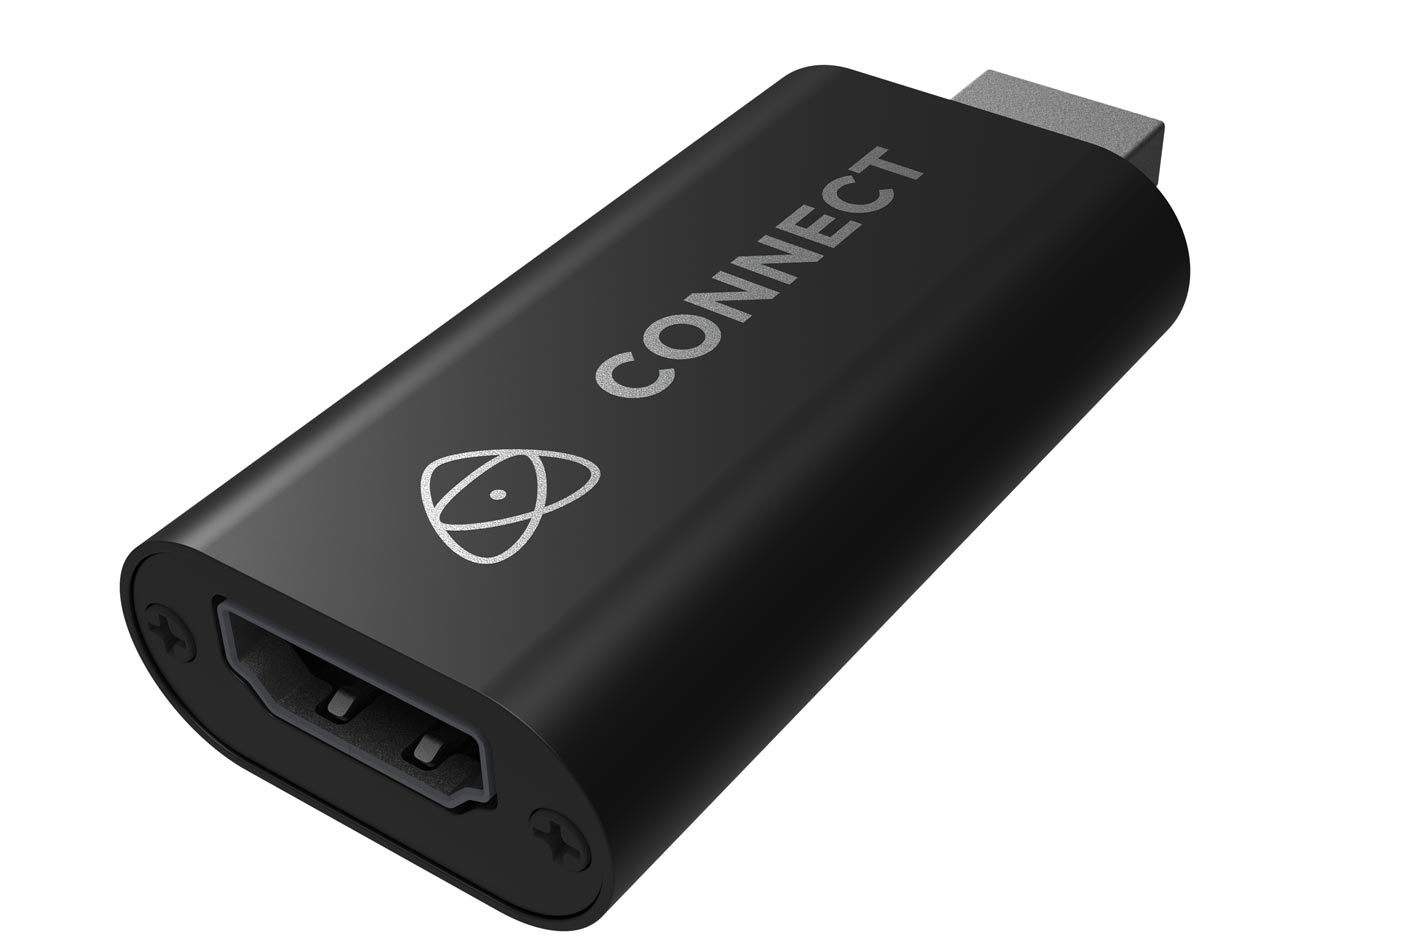 Atomos Connect: a professional HDMI to USB conversion for